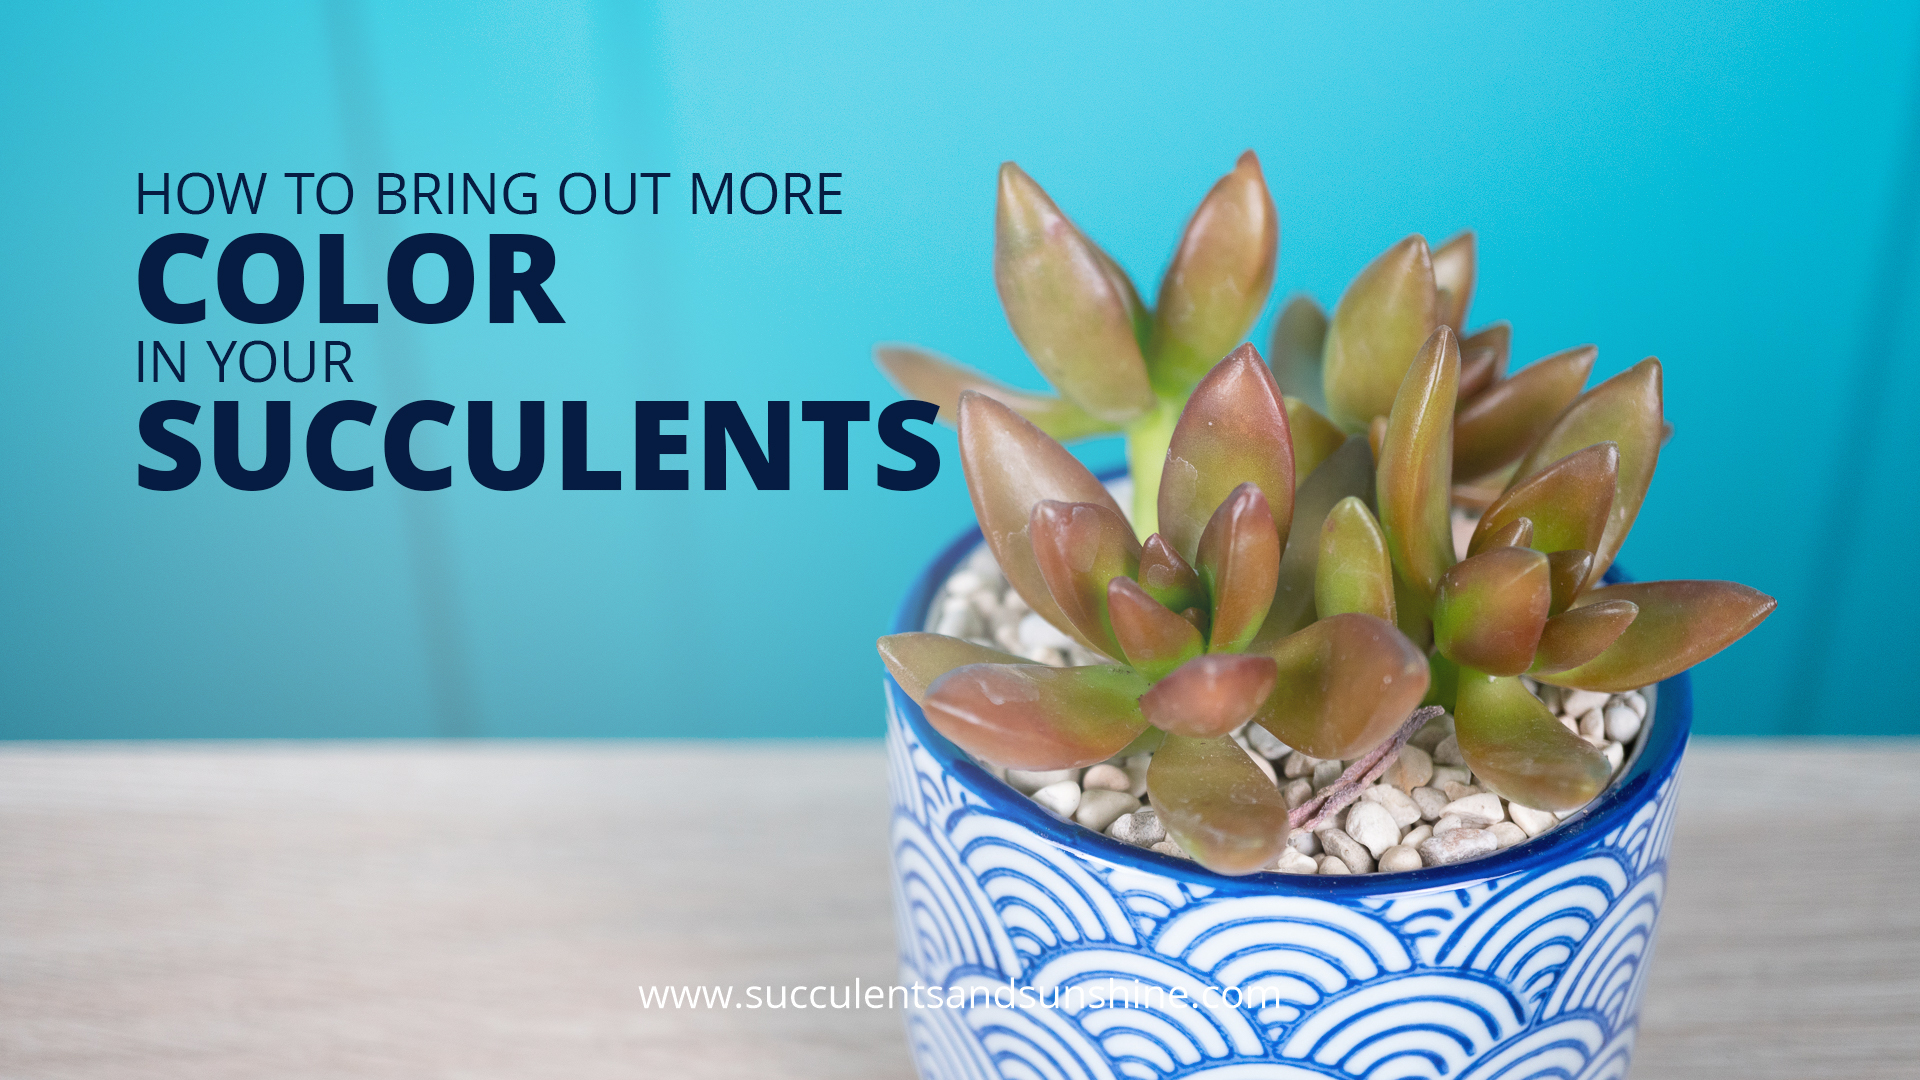 How to bring out more color in your succulents